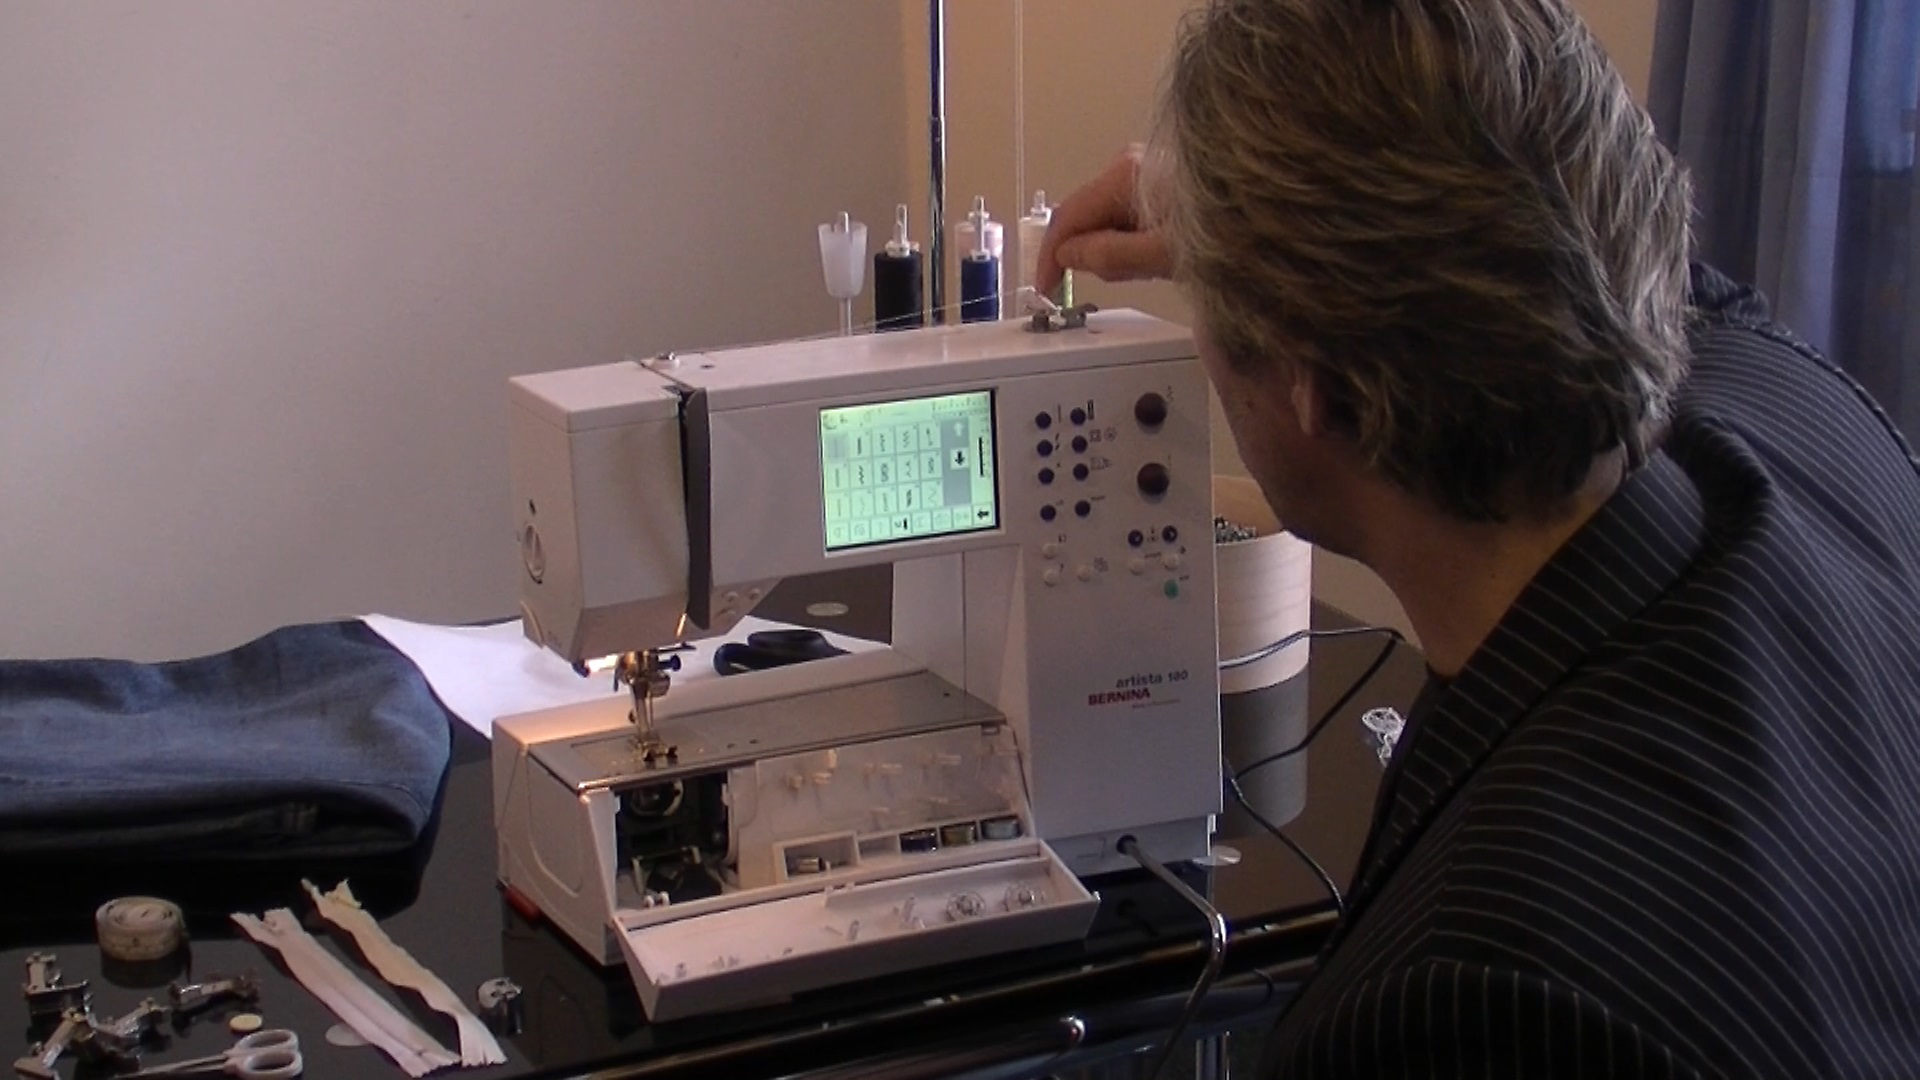 threading a sewing machine is easy with the help of our specially ceated online sewing classes. #onlinesewingclasses.